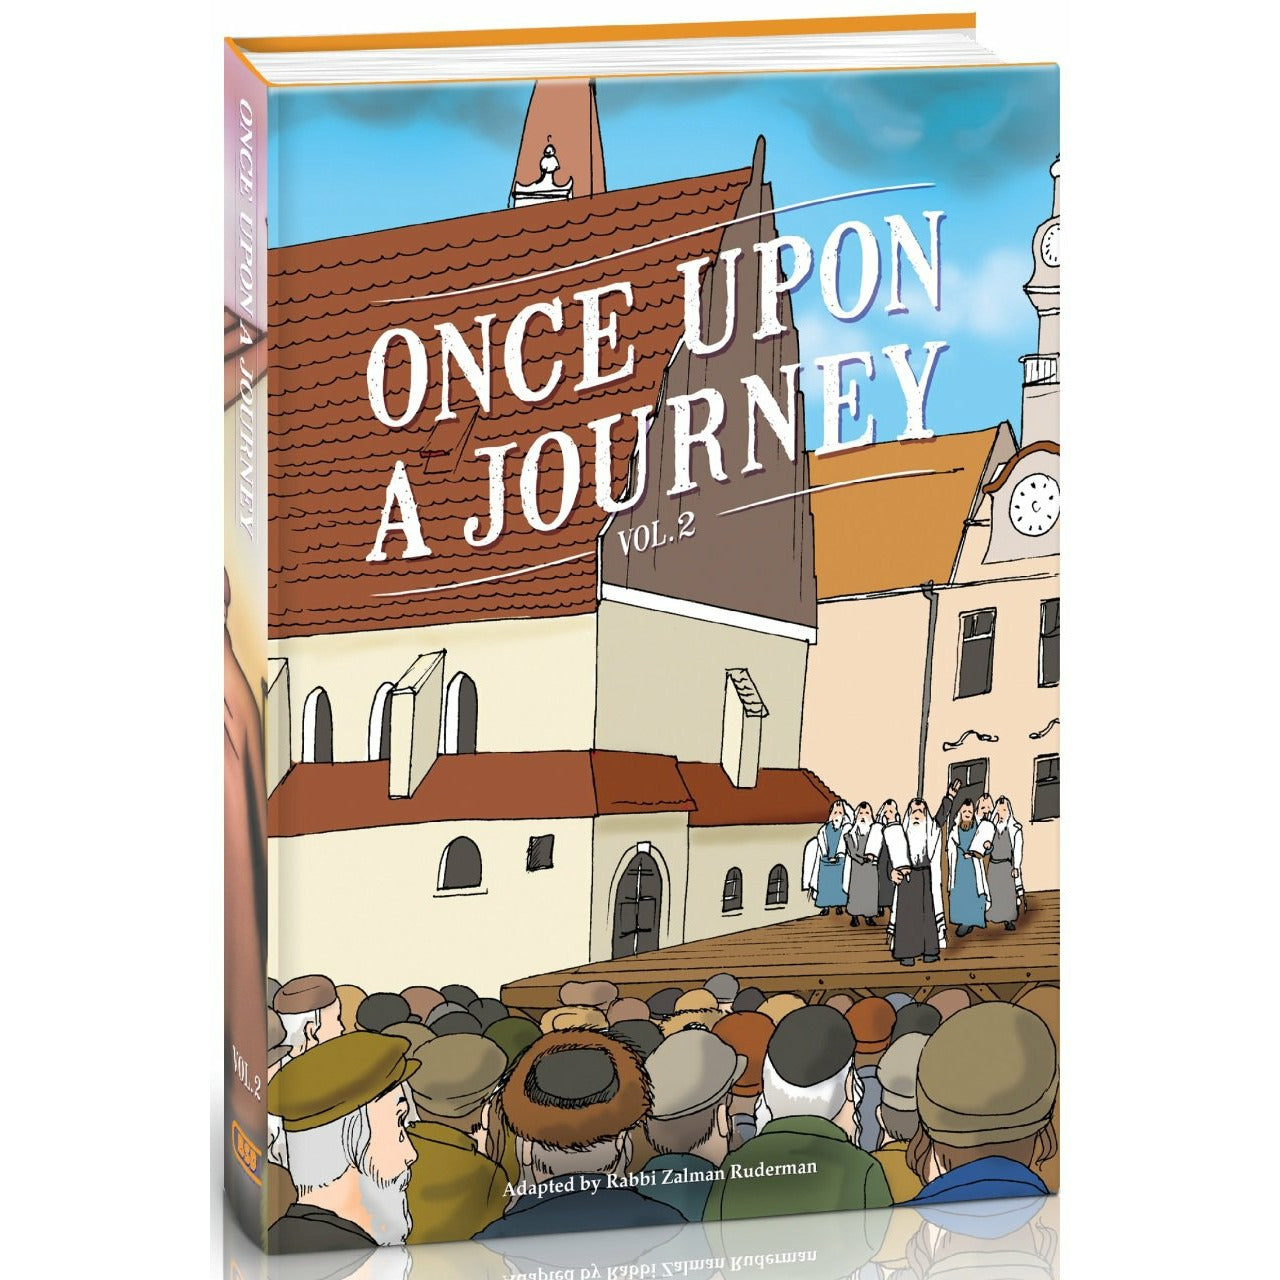 Once Upon a Journey Vol 2